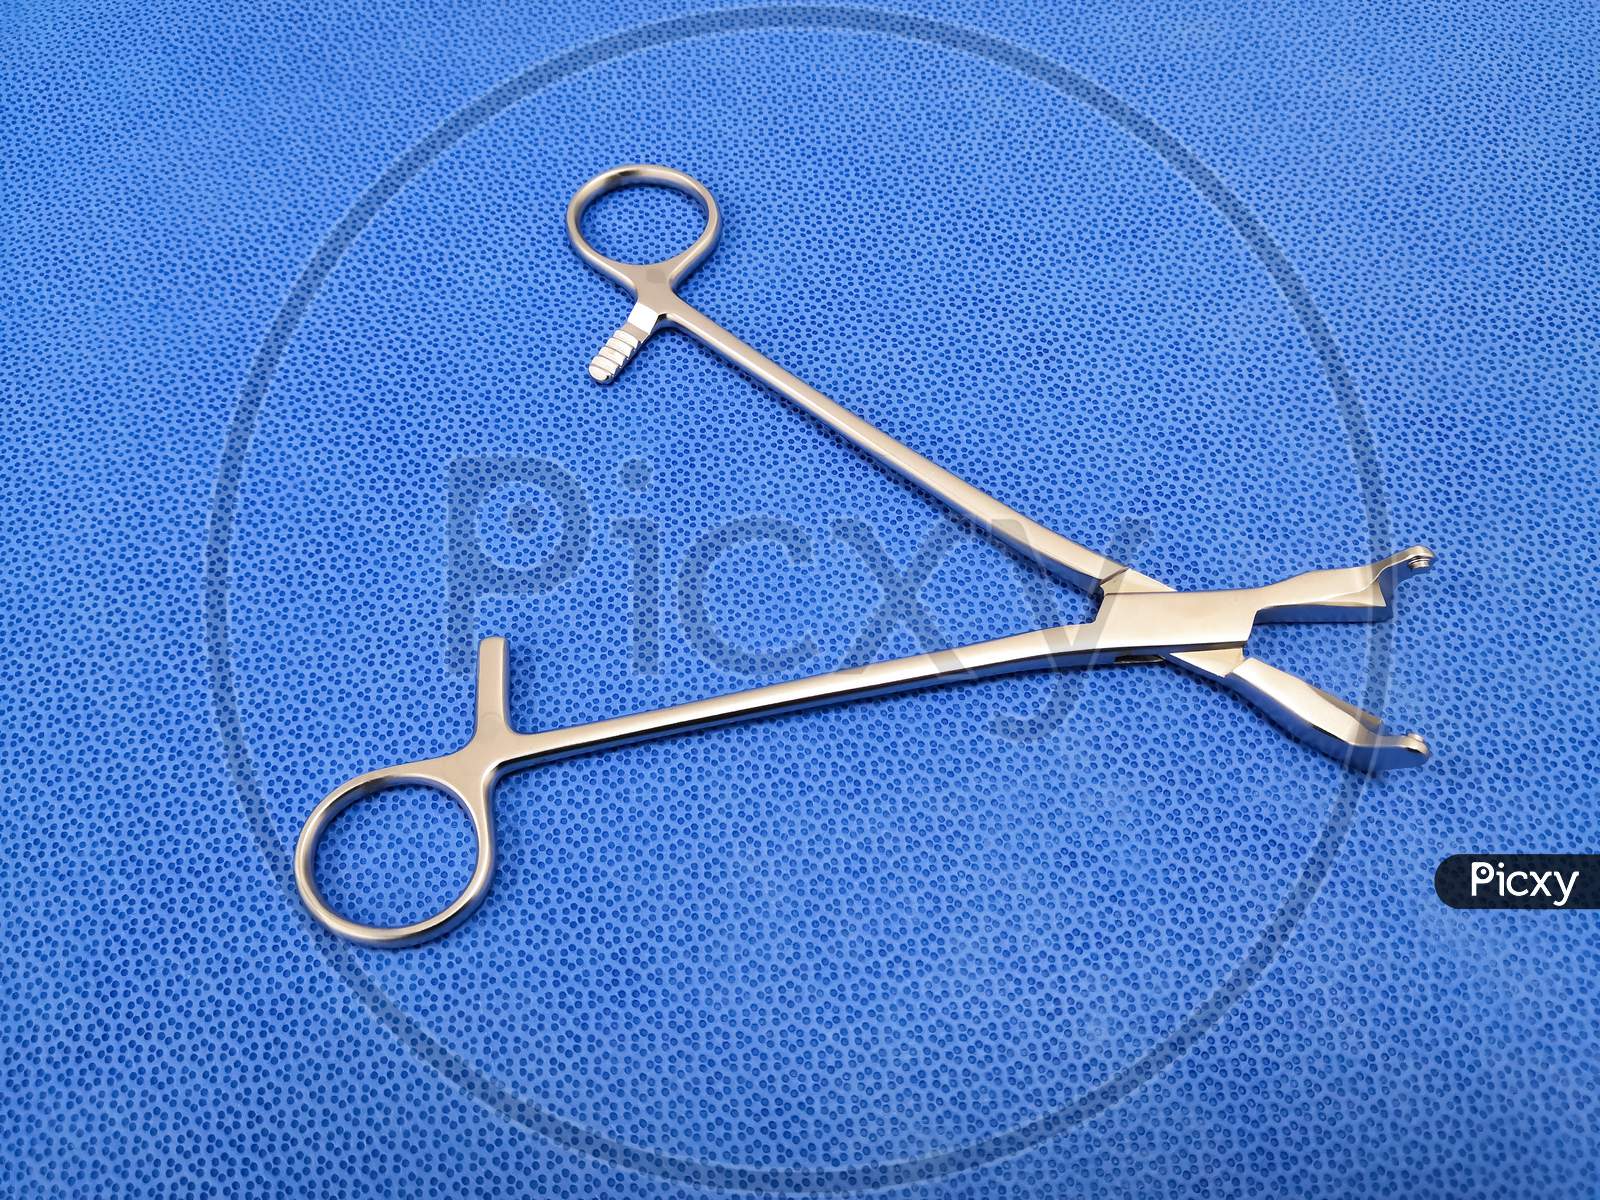 Rocker Forceps Using For Spinal Surgery